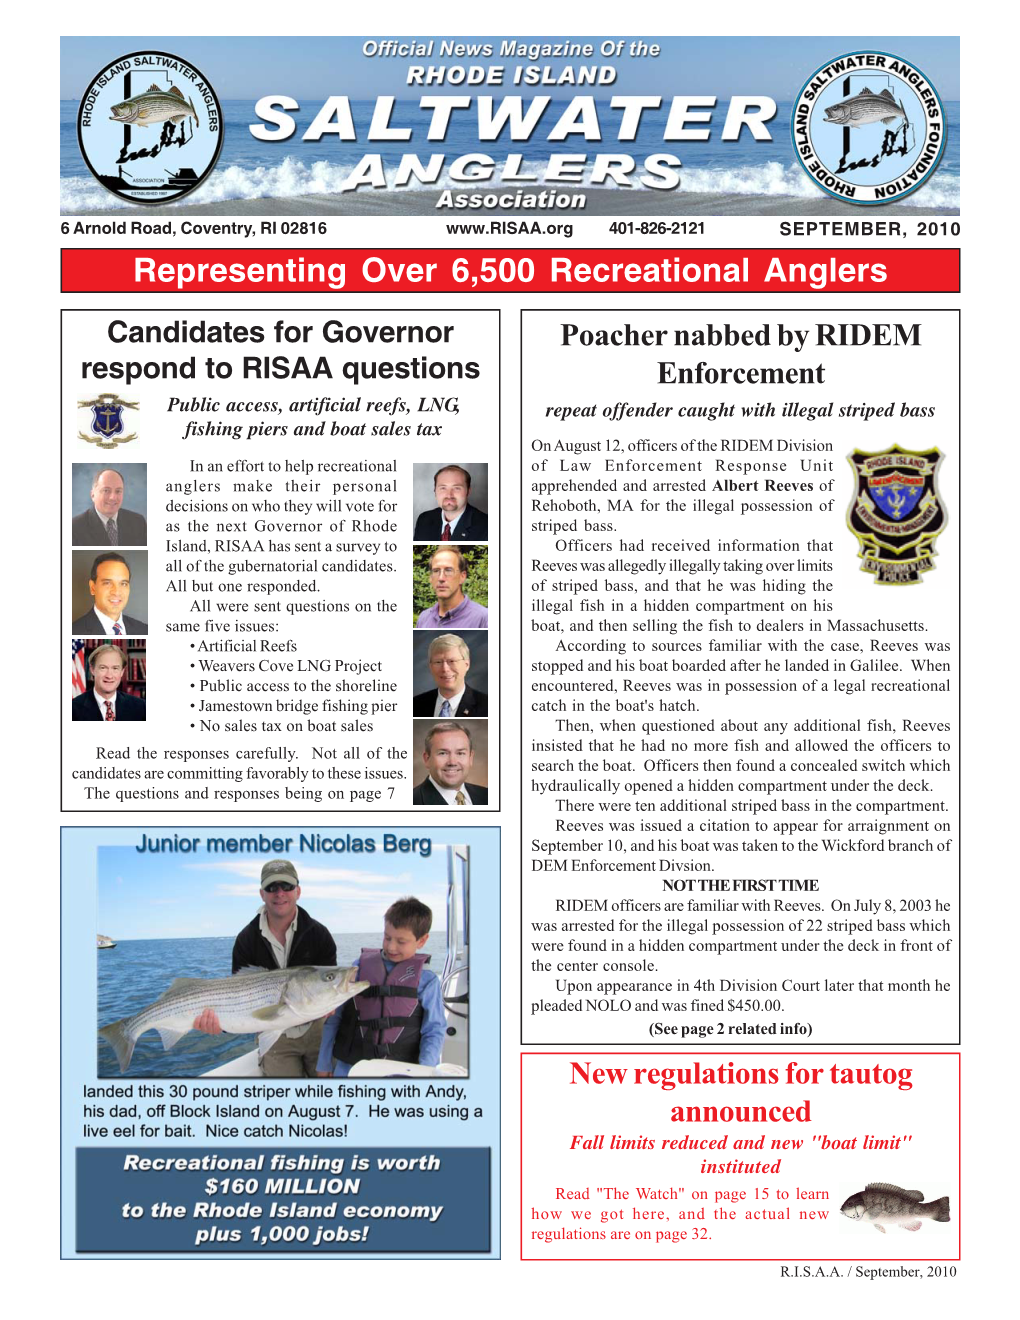 Representing Over 6,500 Recreational Anglers